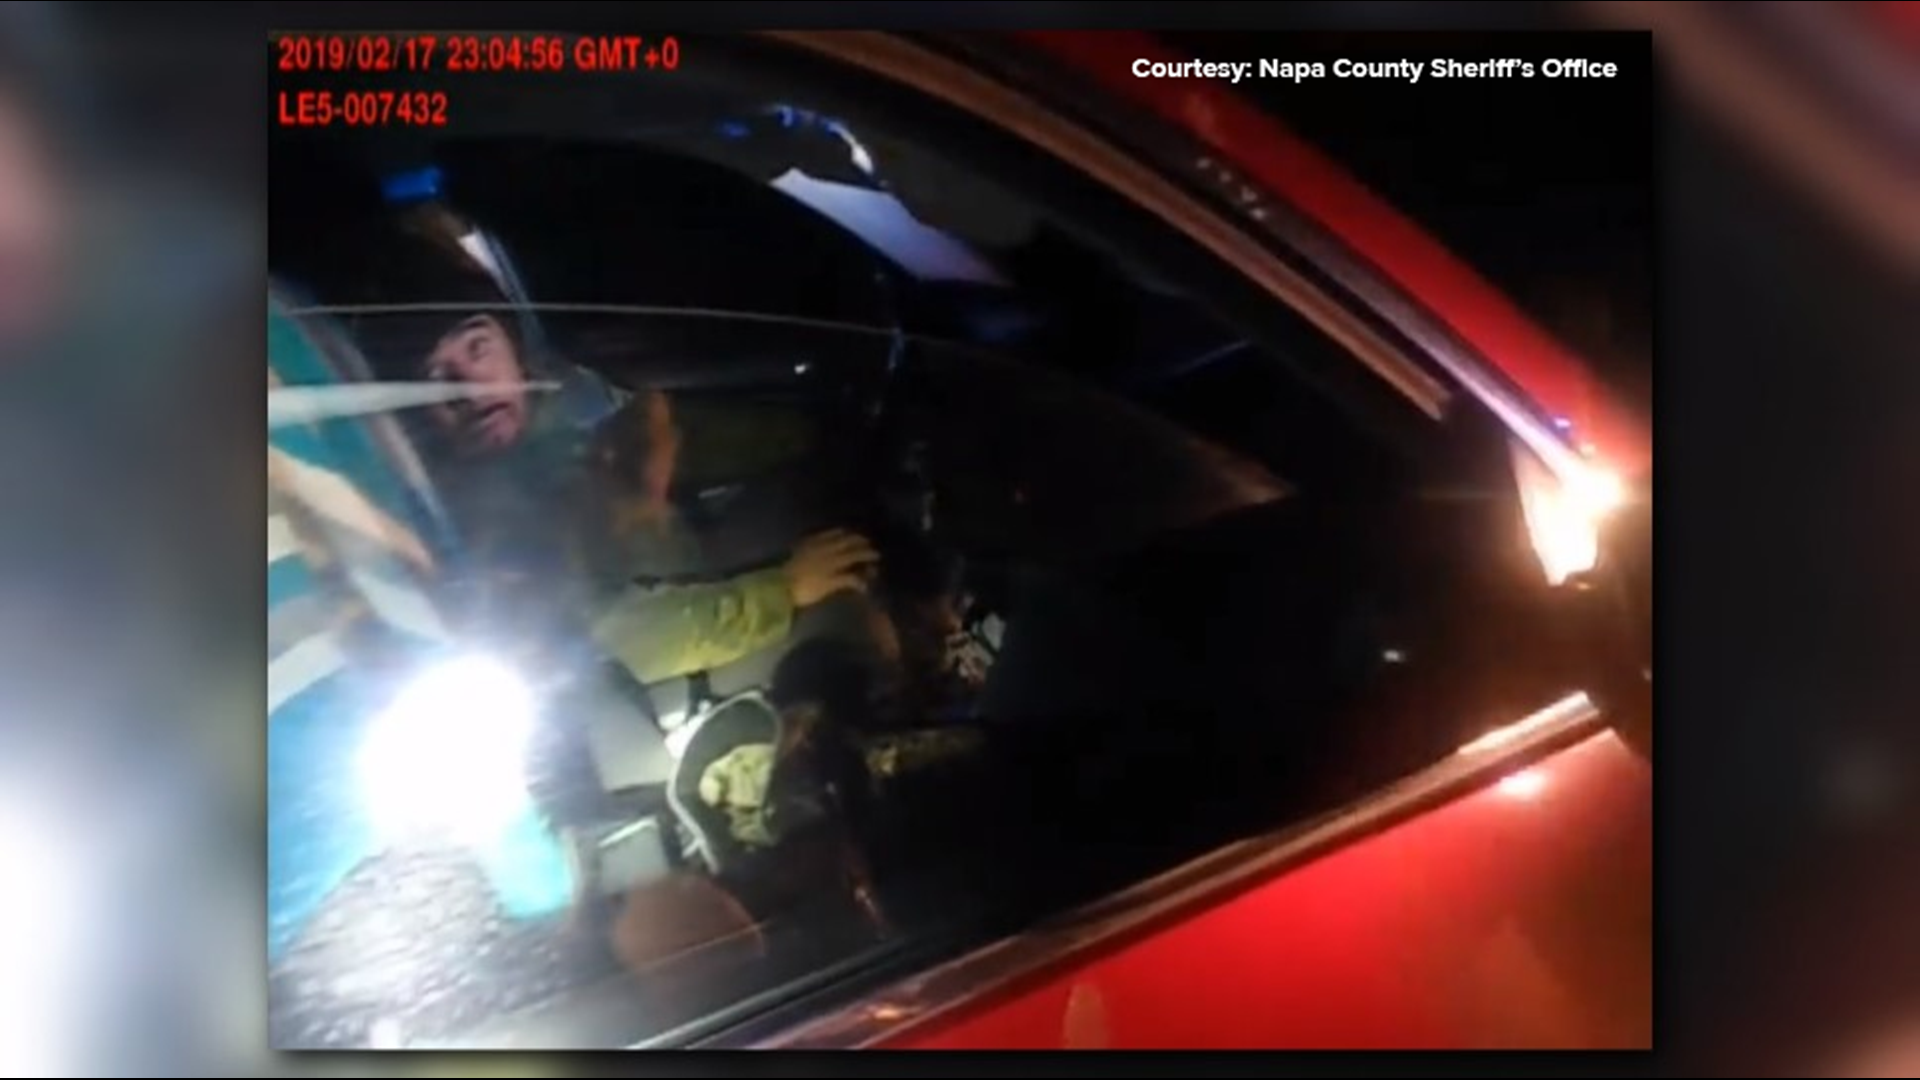 The Napa County Sheriff’s Office has released body cam footage of a deadly shootout between a deputy and suspect from Sunday night. It happened around 11 p.m. in the 1100 block of Henry Road, in a rural area just to the southwest of Napa.